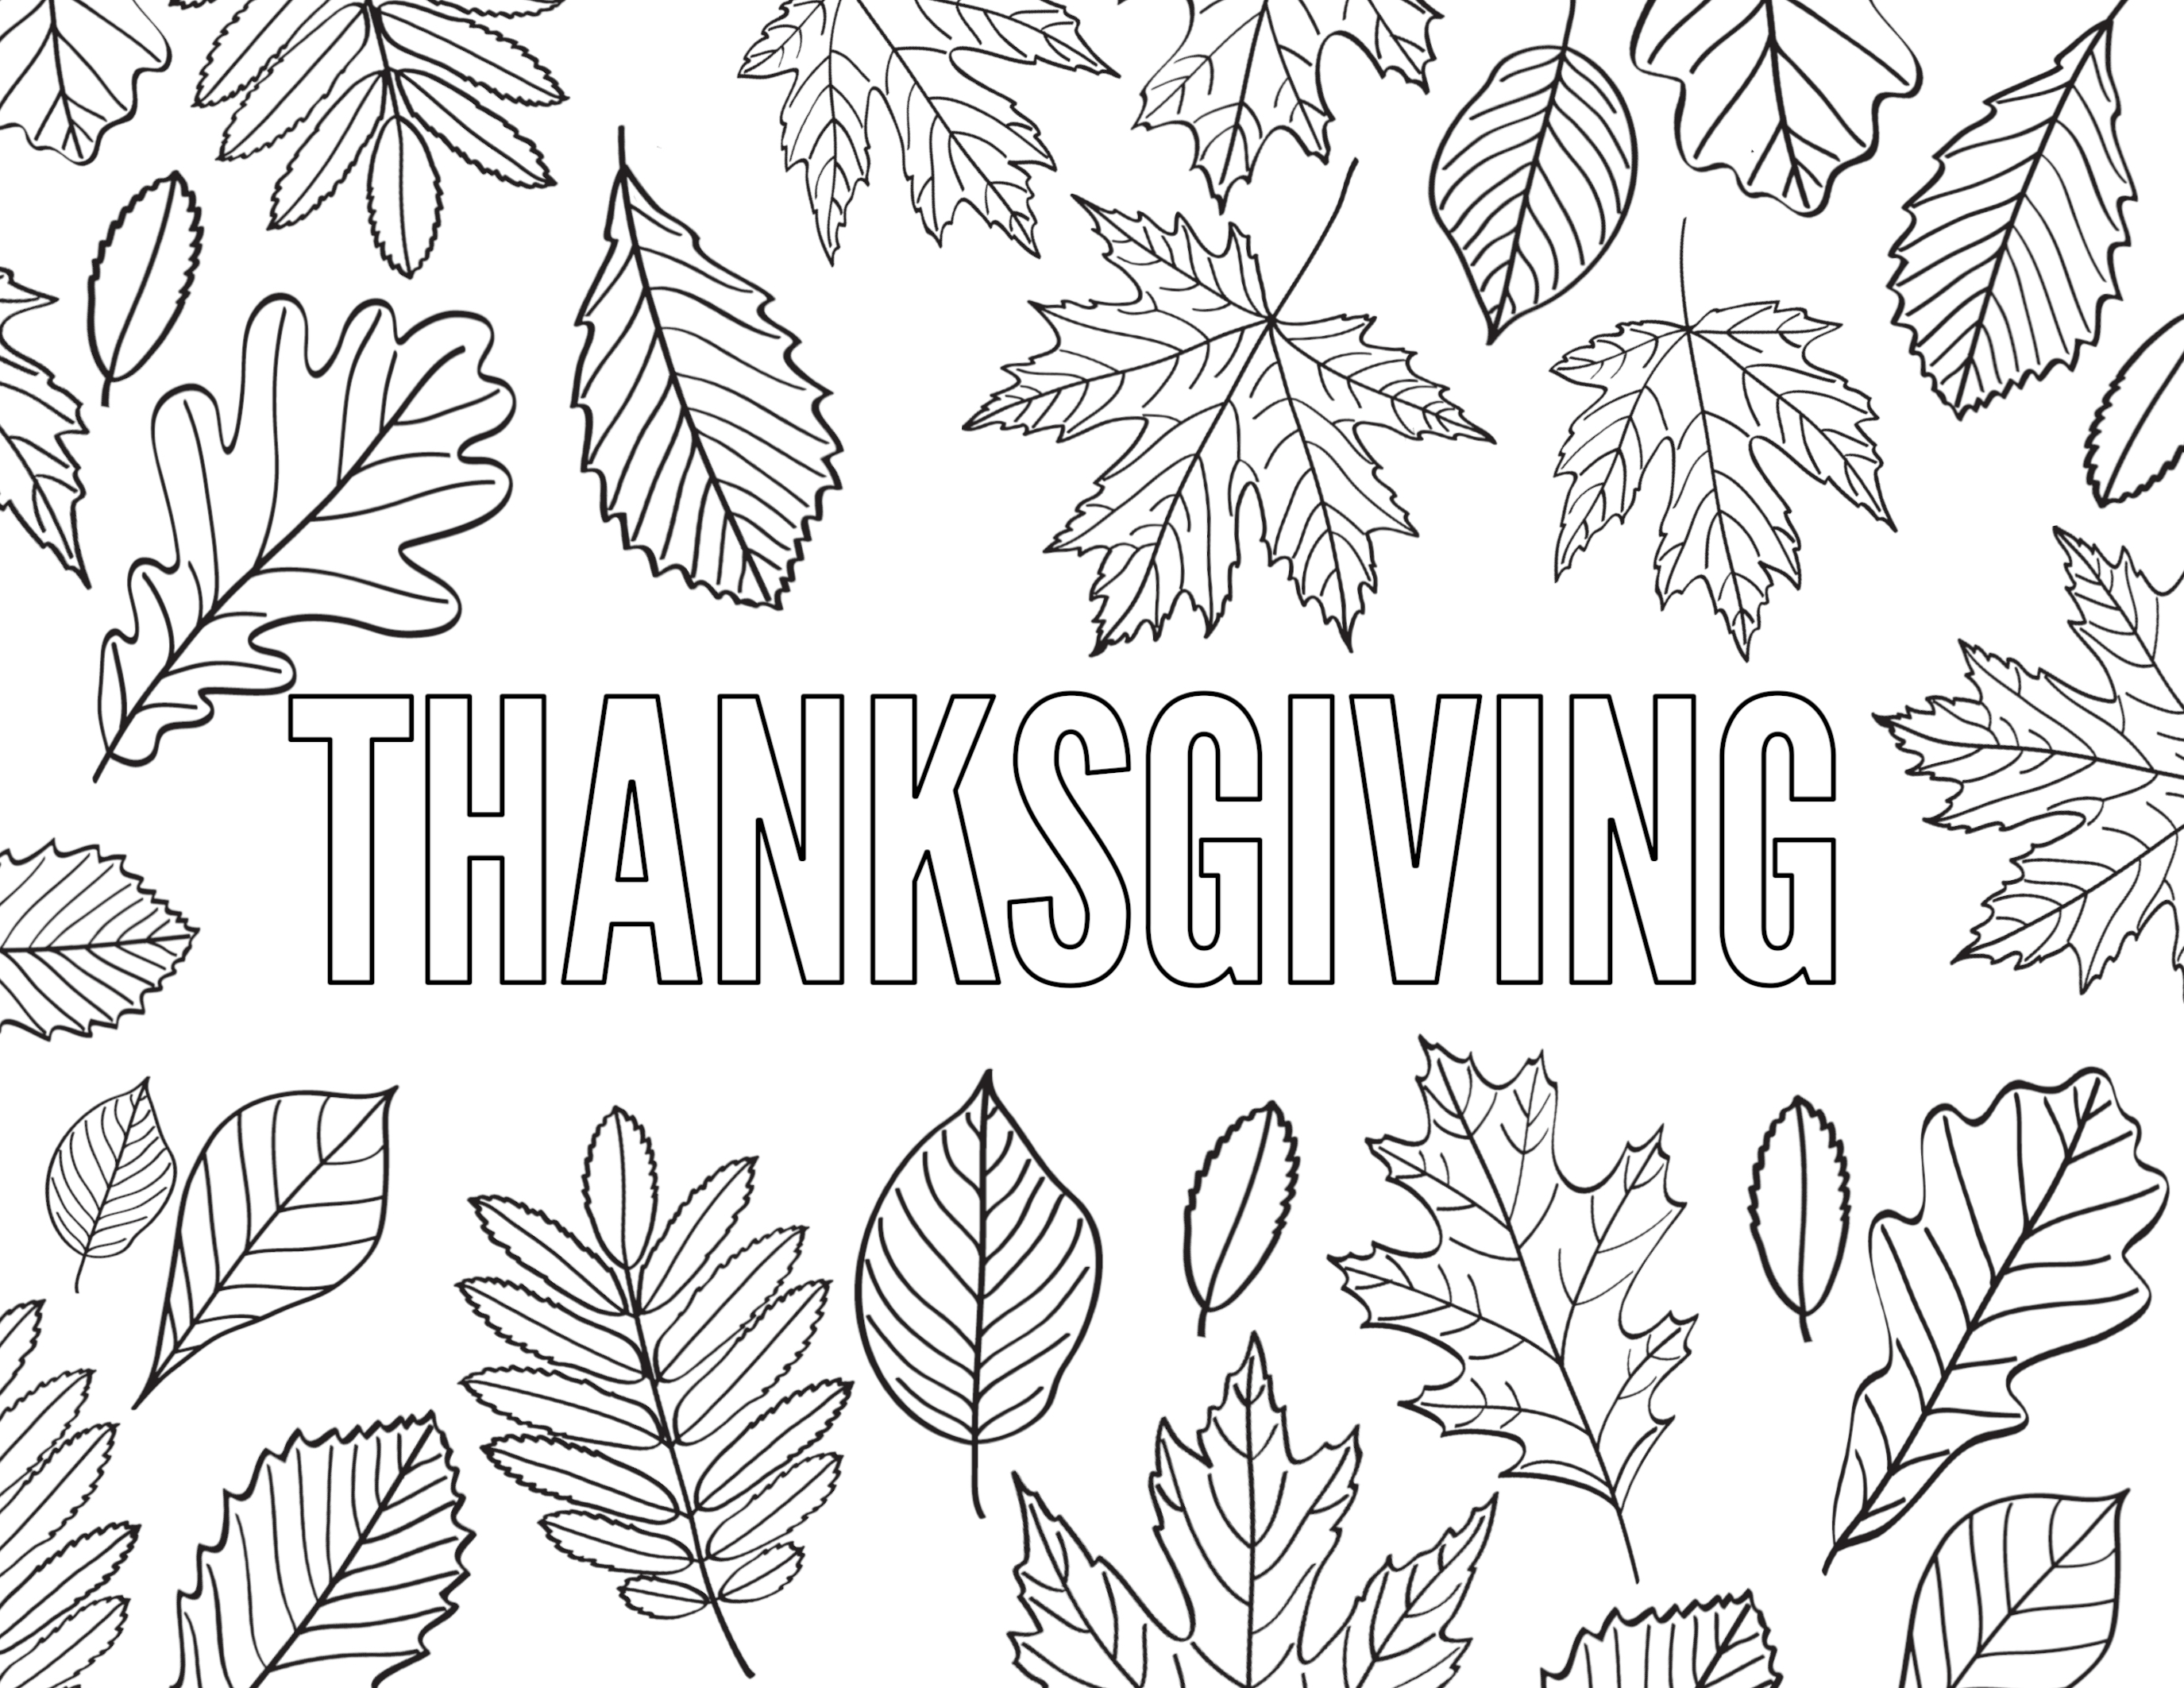 free coloring pages for thanksgiving printables